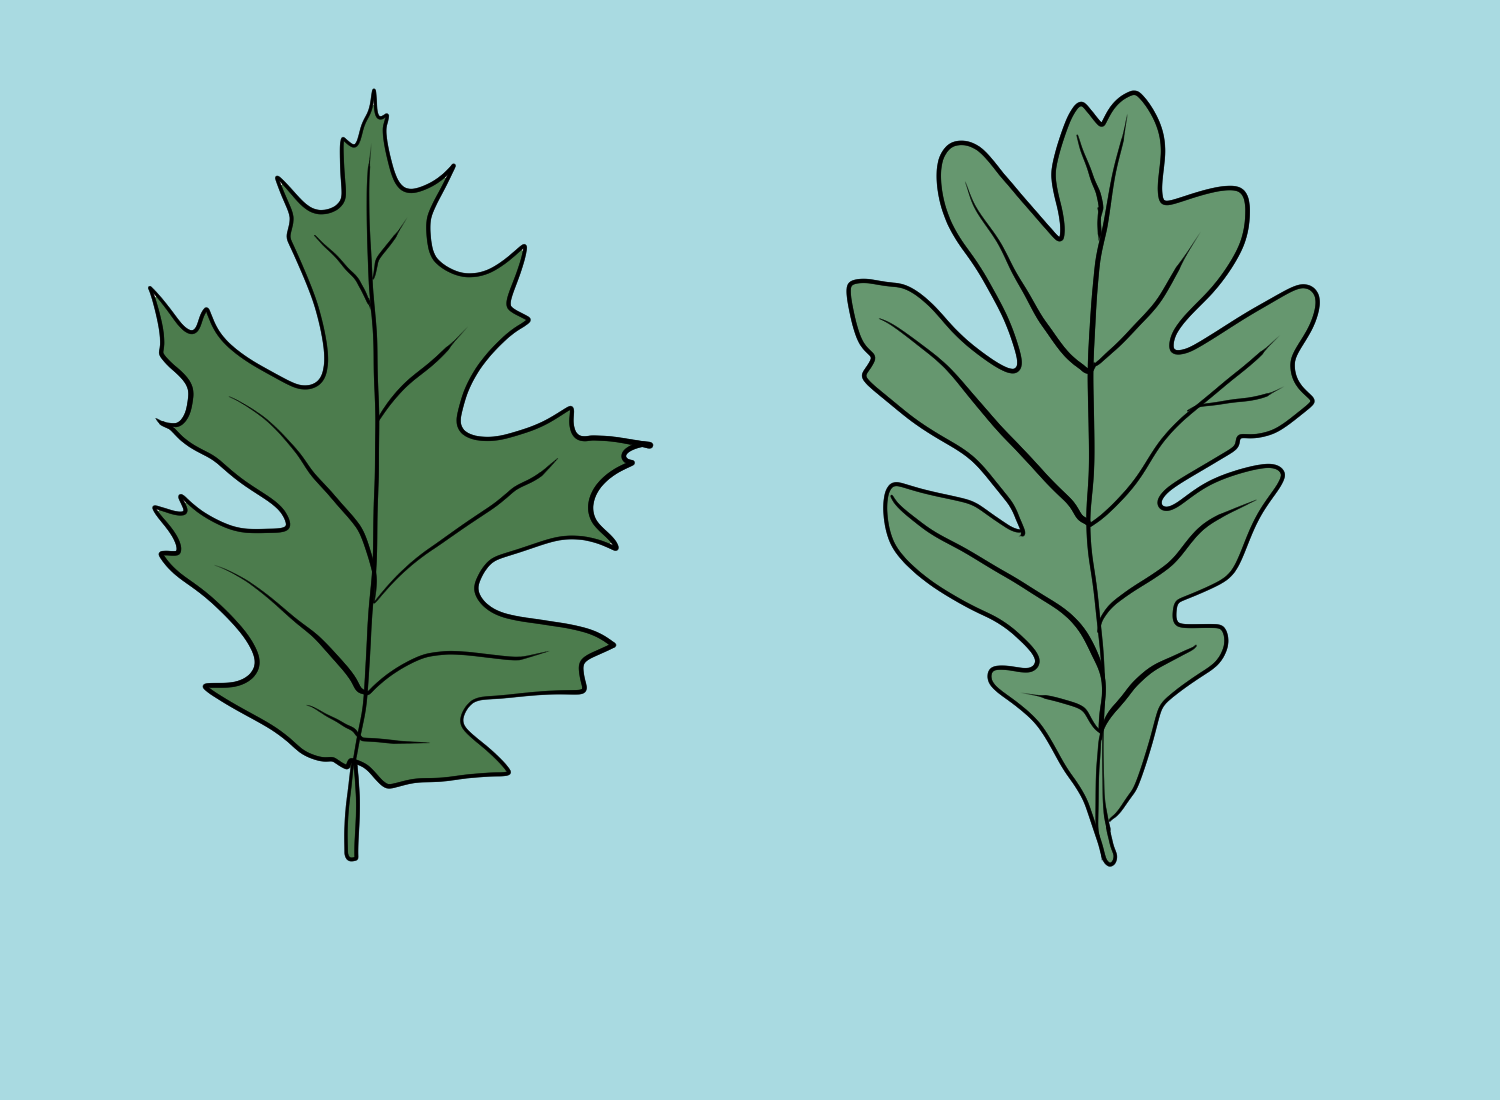 Leaf shape and structure